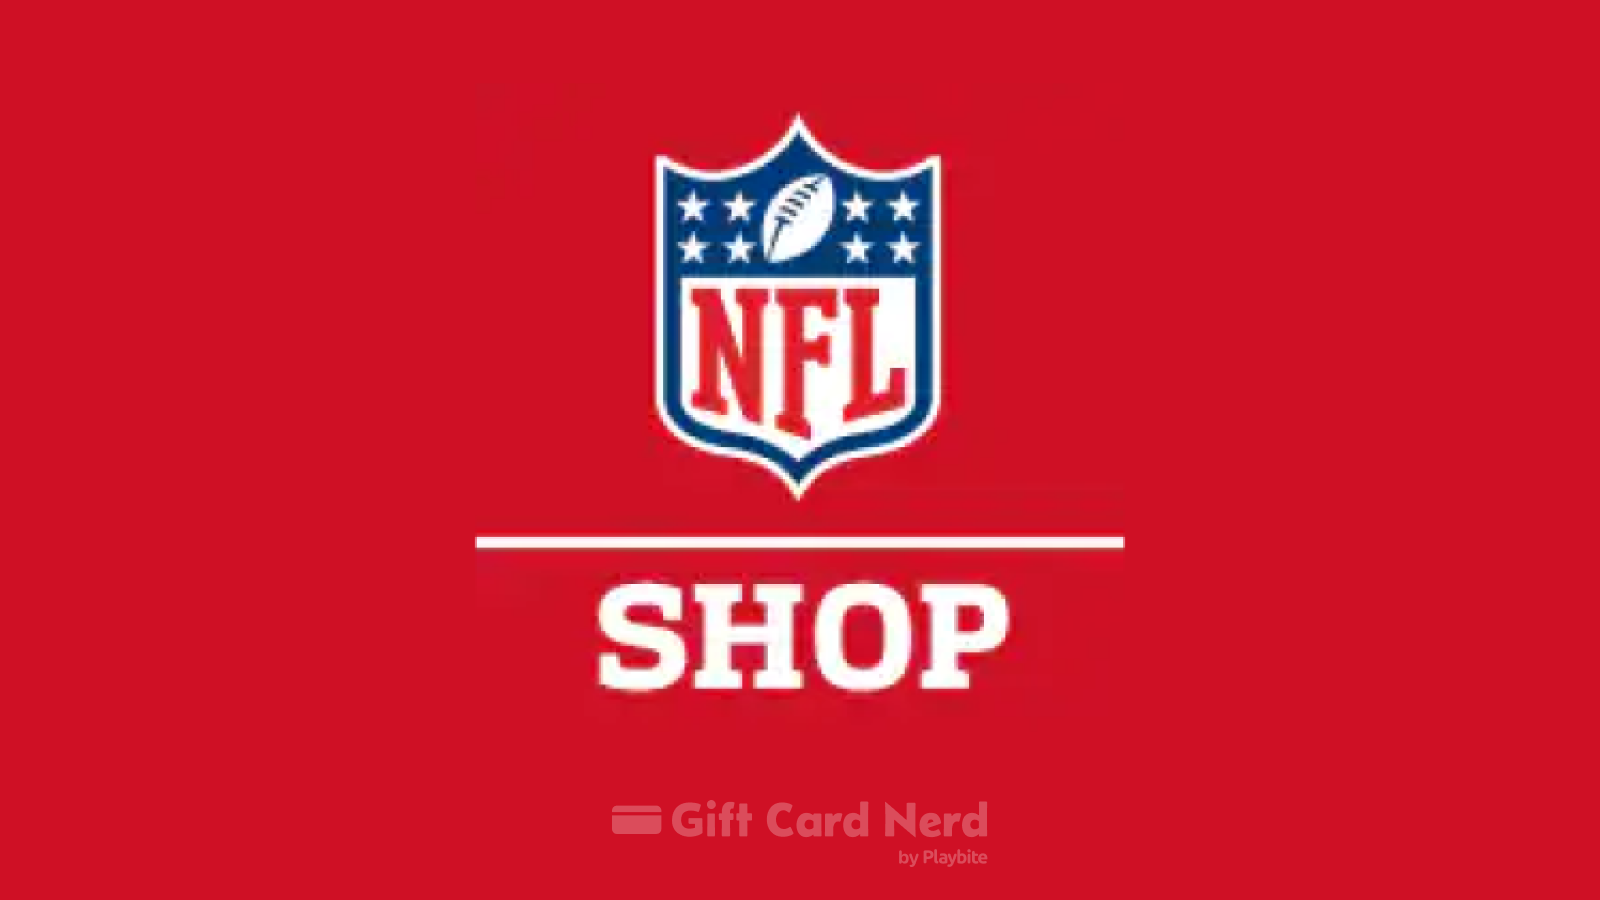 Can You Buy NFL Shop Gift Cards at Target?